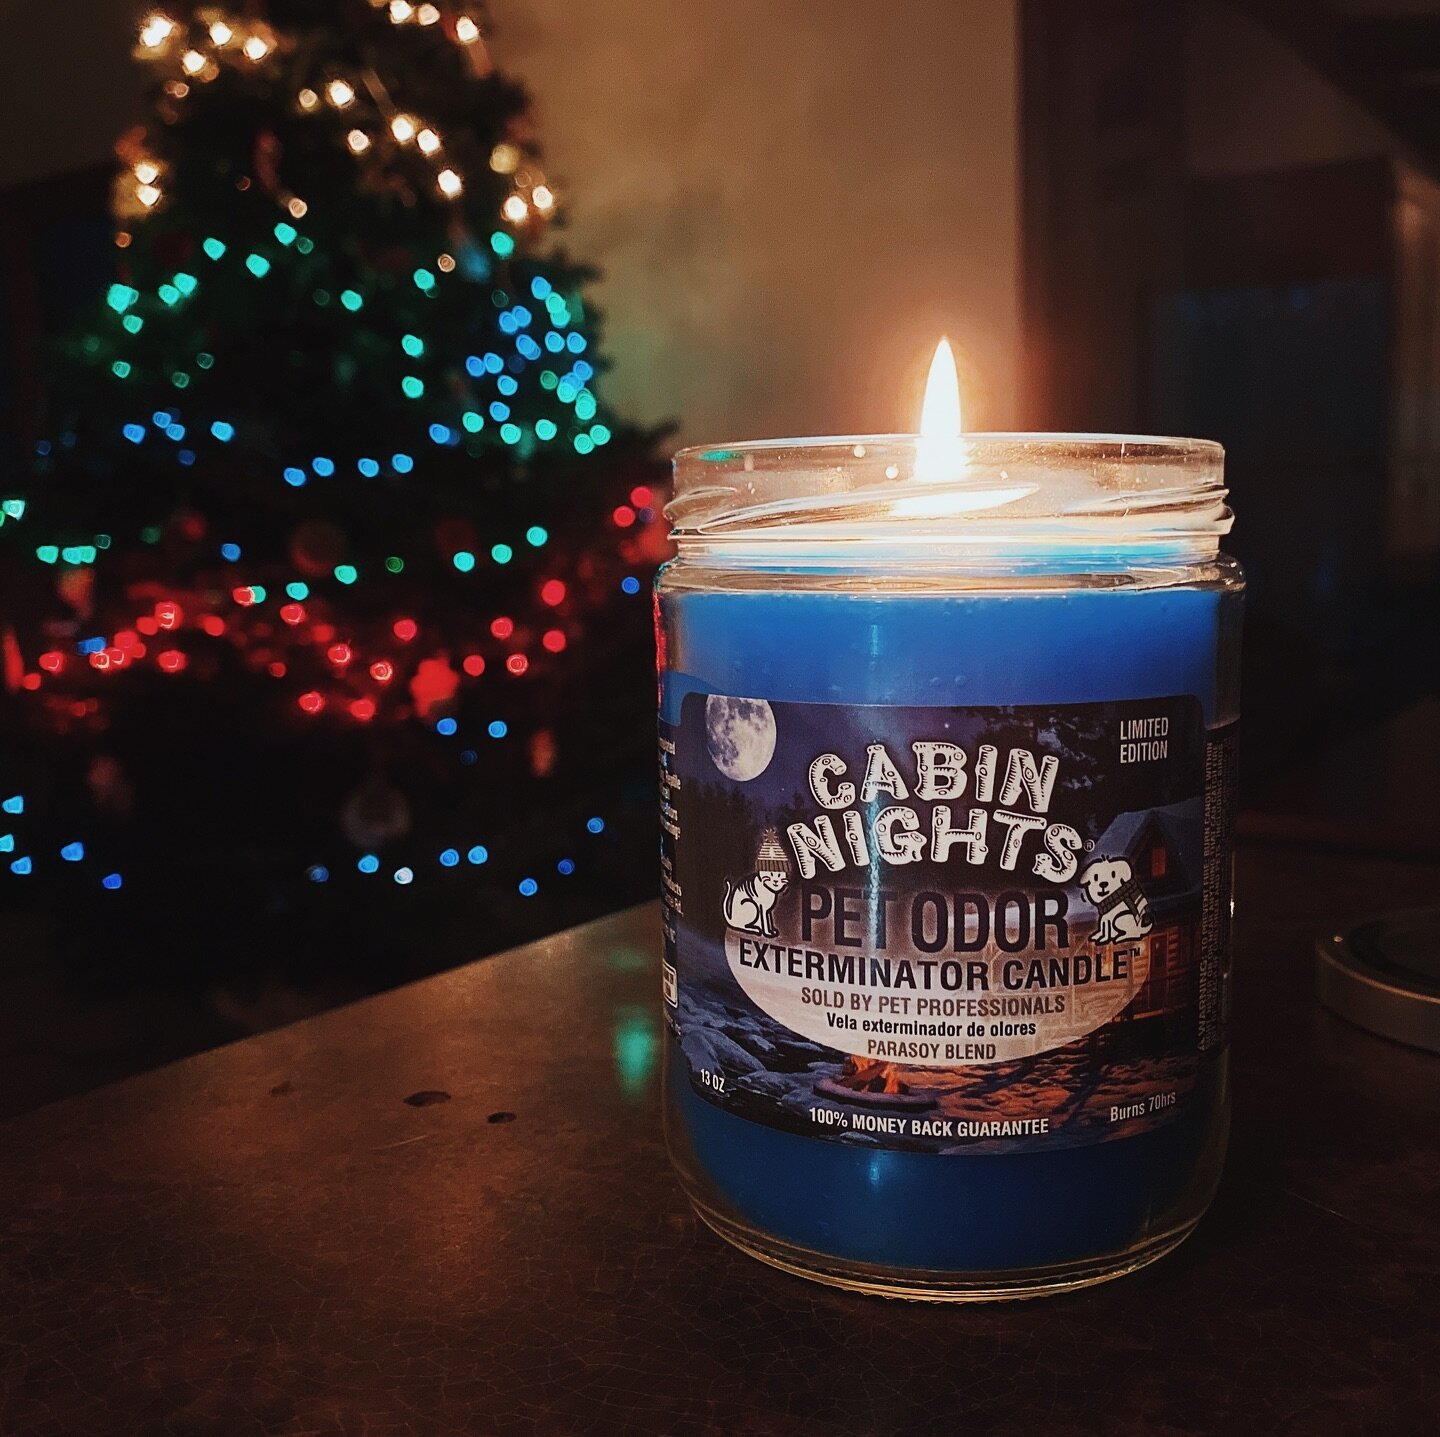 Hosting for the holidays? We have tons of delicious pet odor eliminating holiday candles for you to enjoy! Plus tons of stocking stuffers for your furry friends 🤶🐶 🎅 Stop by today!